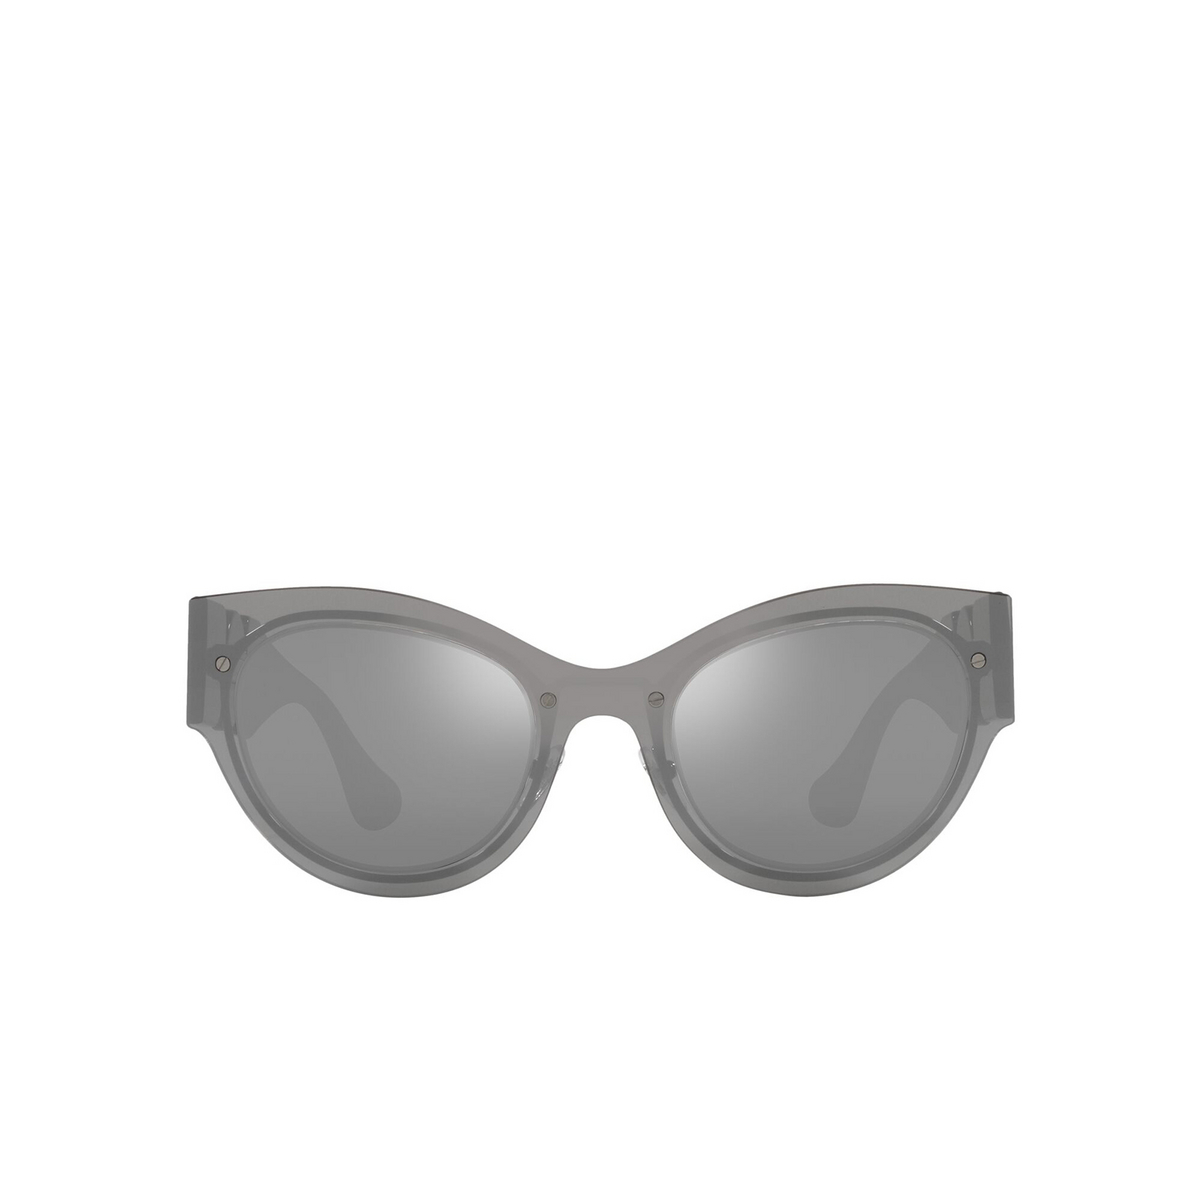 Versace® Cat-eye Sunglasses: VE2234 color Transparent Grey Mirror Silver 10016G - front view.